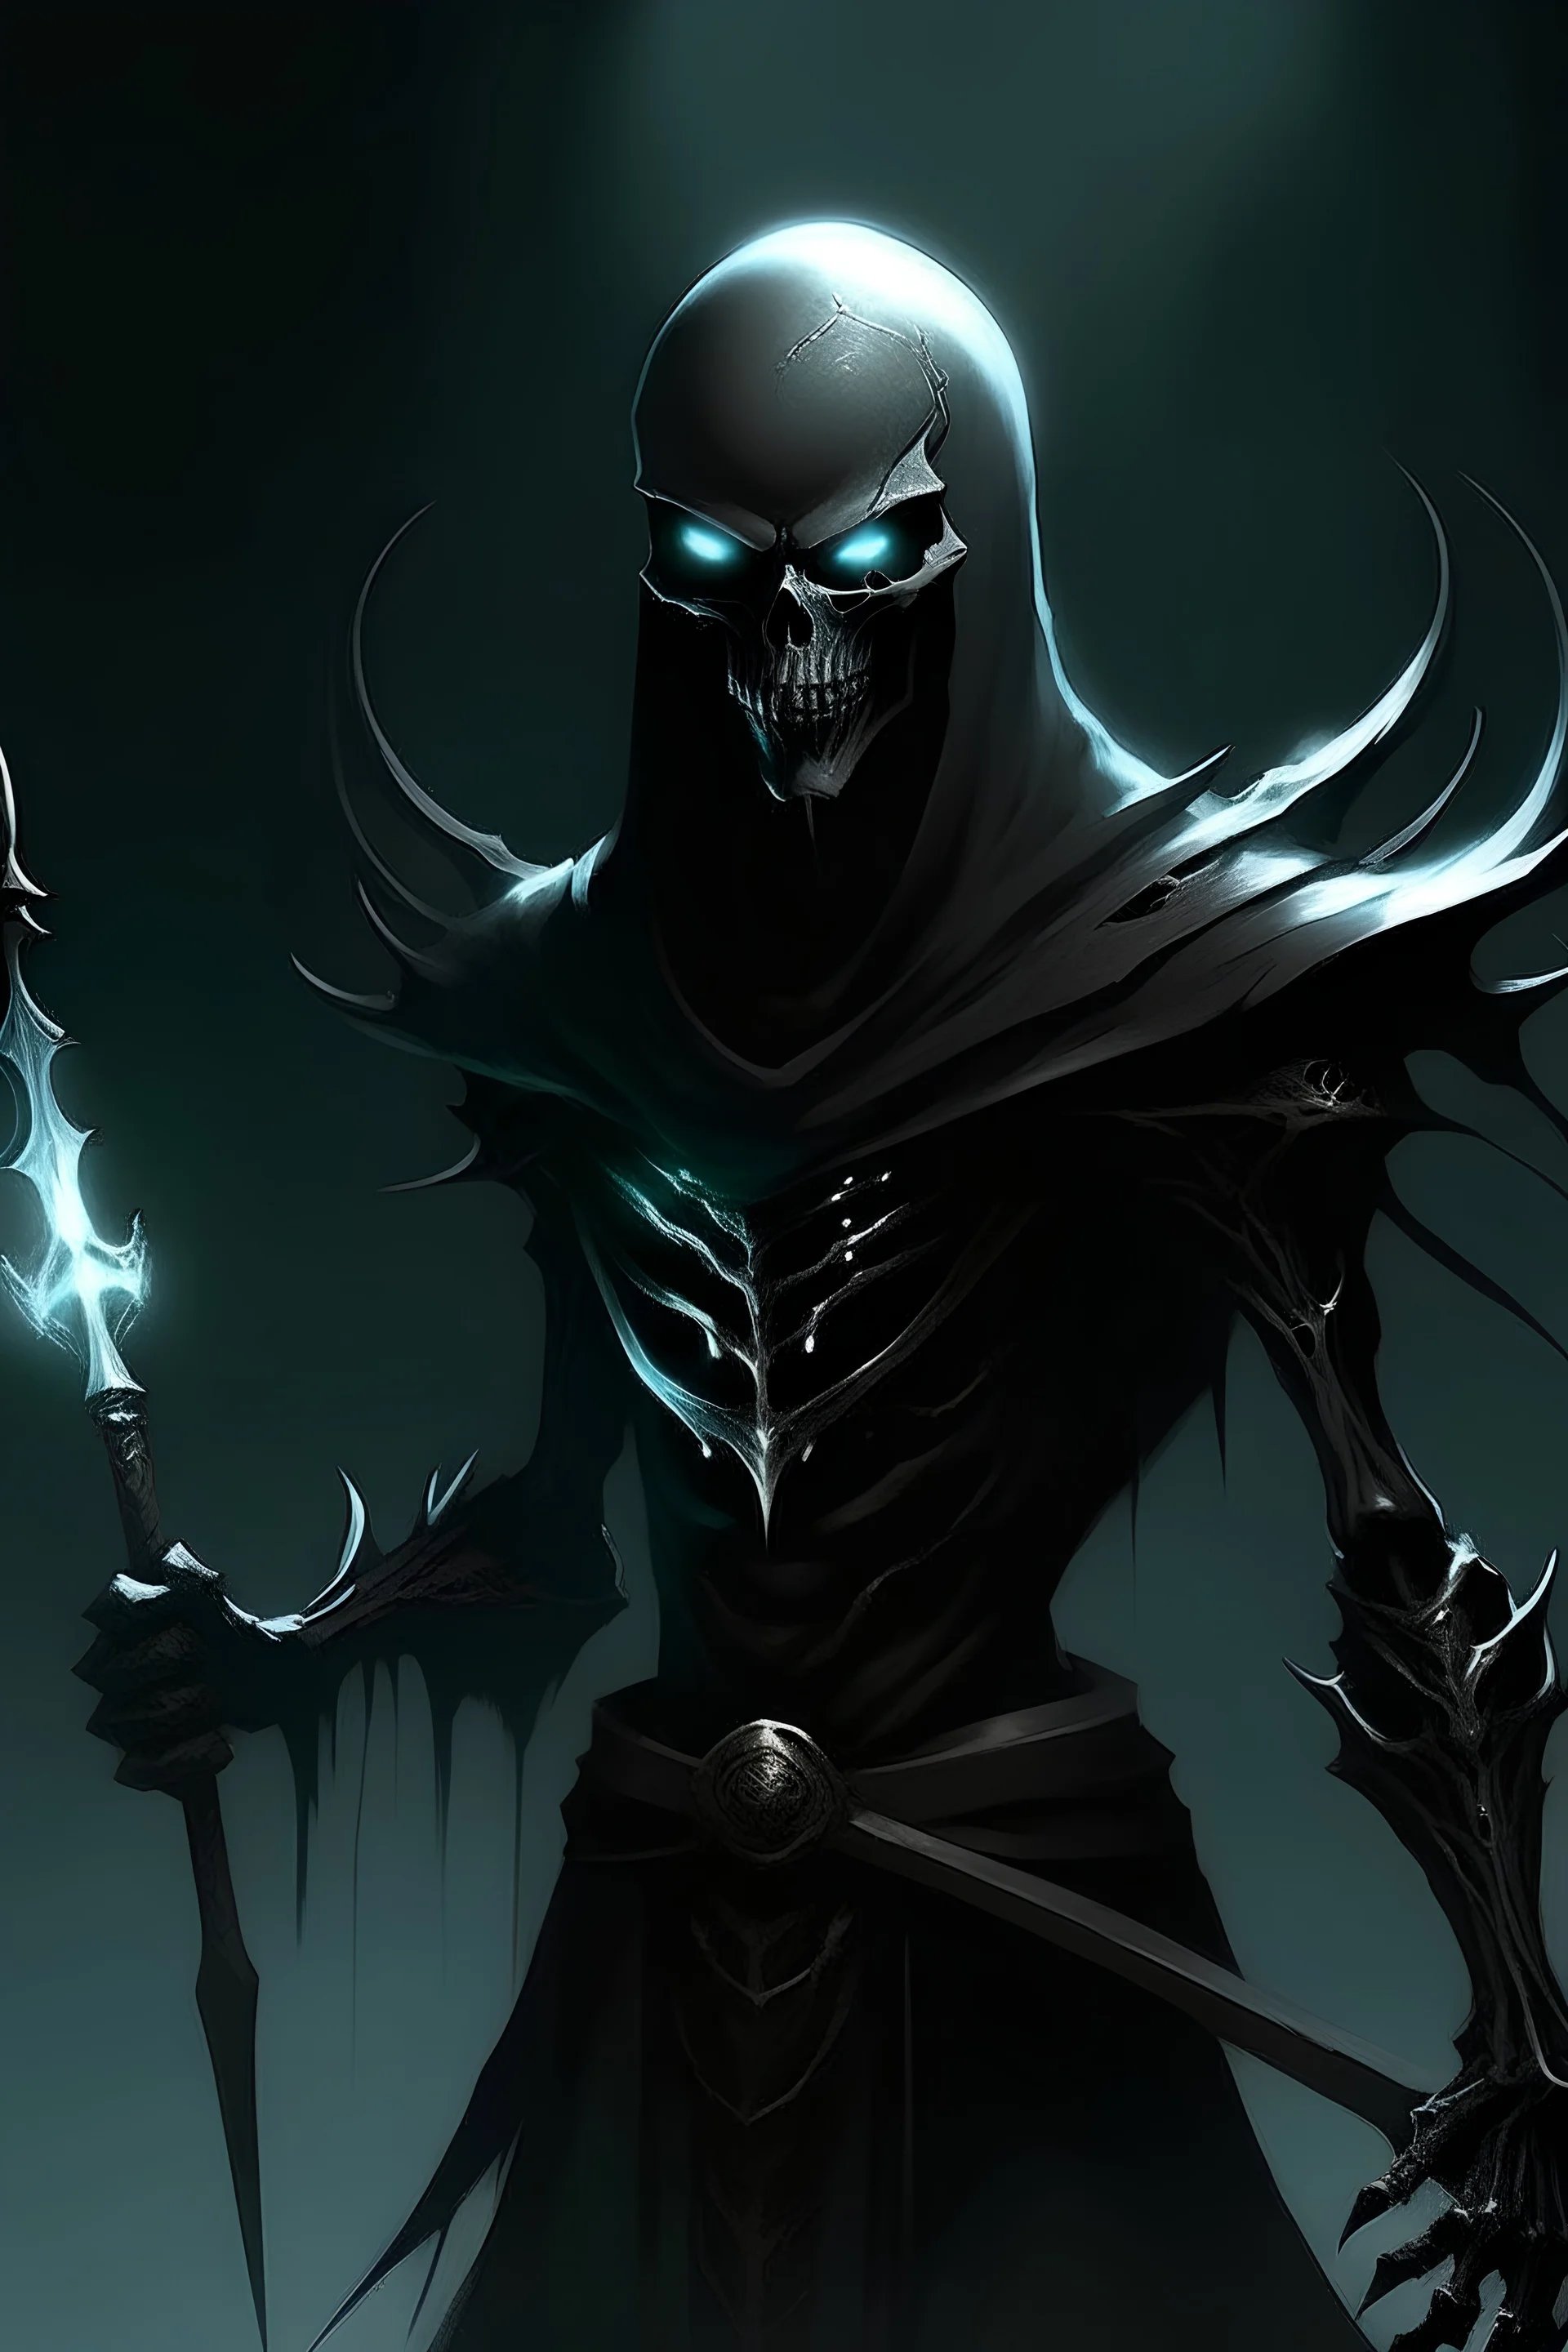 Deamon with lighting Trident in right hand and looks like black assasin that looks like Human